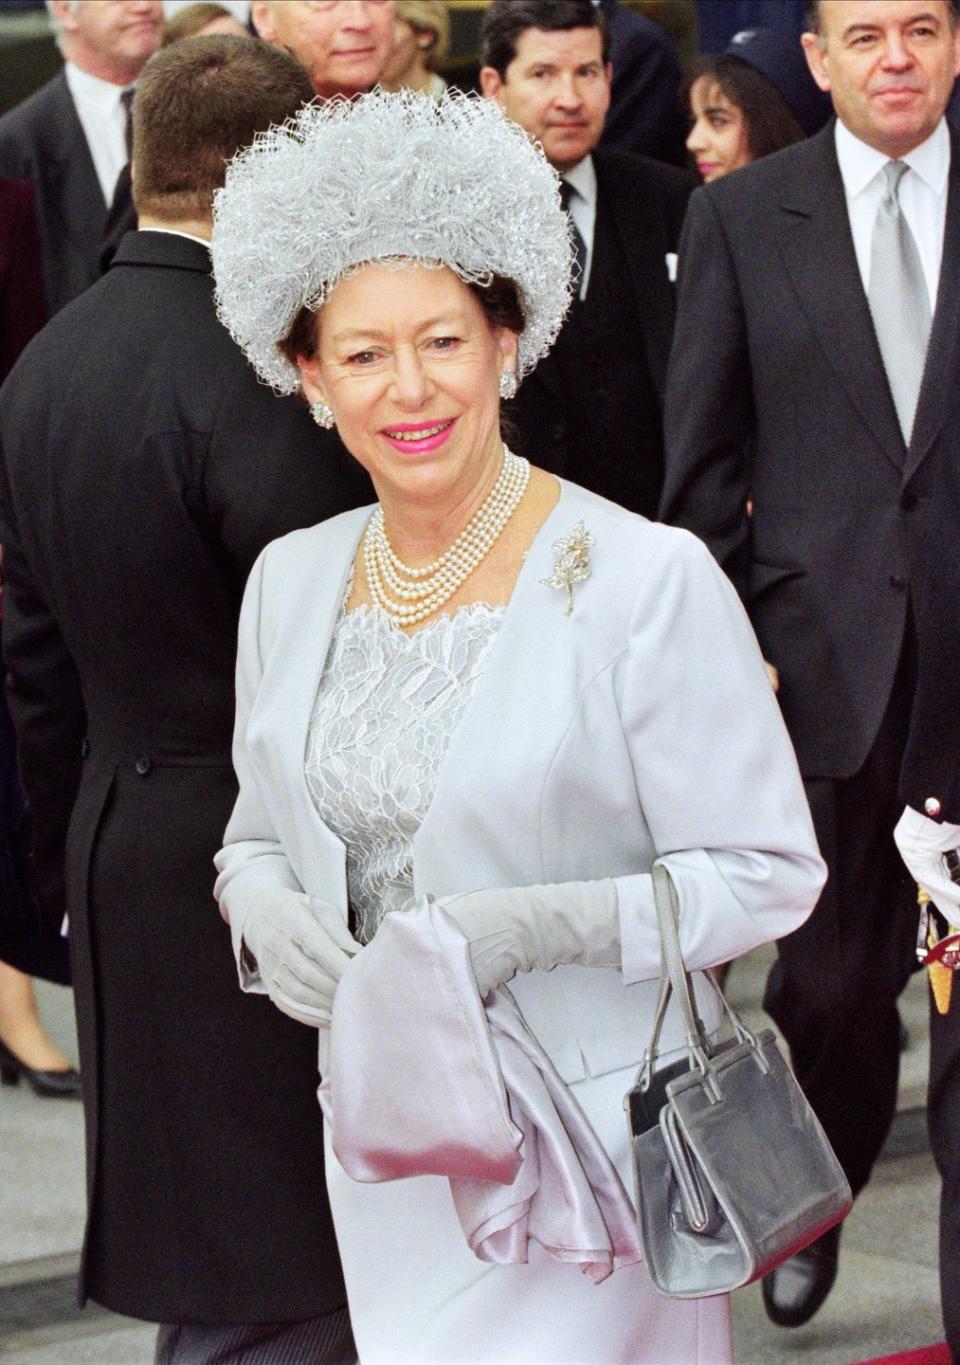 <p>Princess Margaret, Countess of Snowdon, wears a coordinated icy blue look to greet French President Jacques Chirac at London's Waterloo station in 1996.</p>